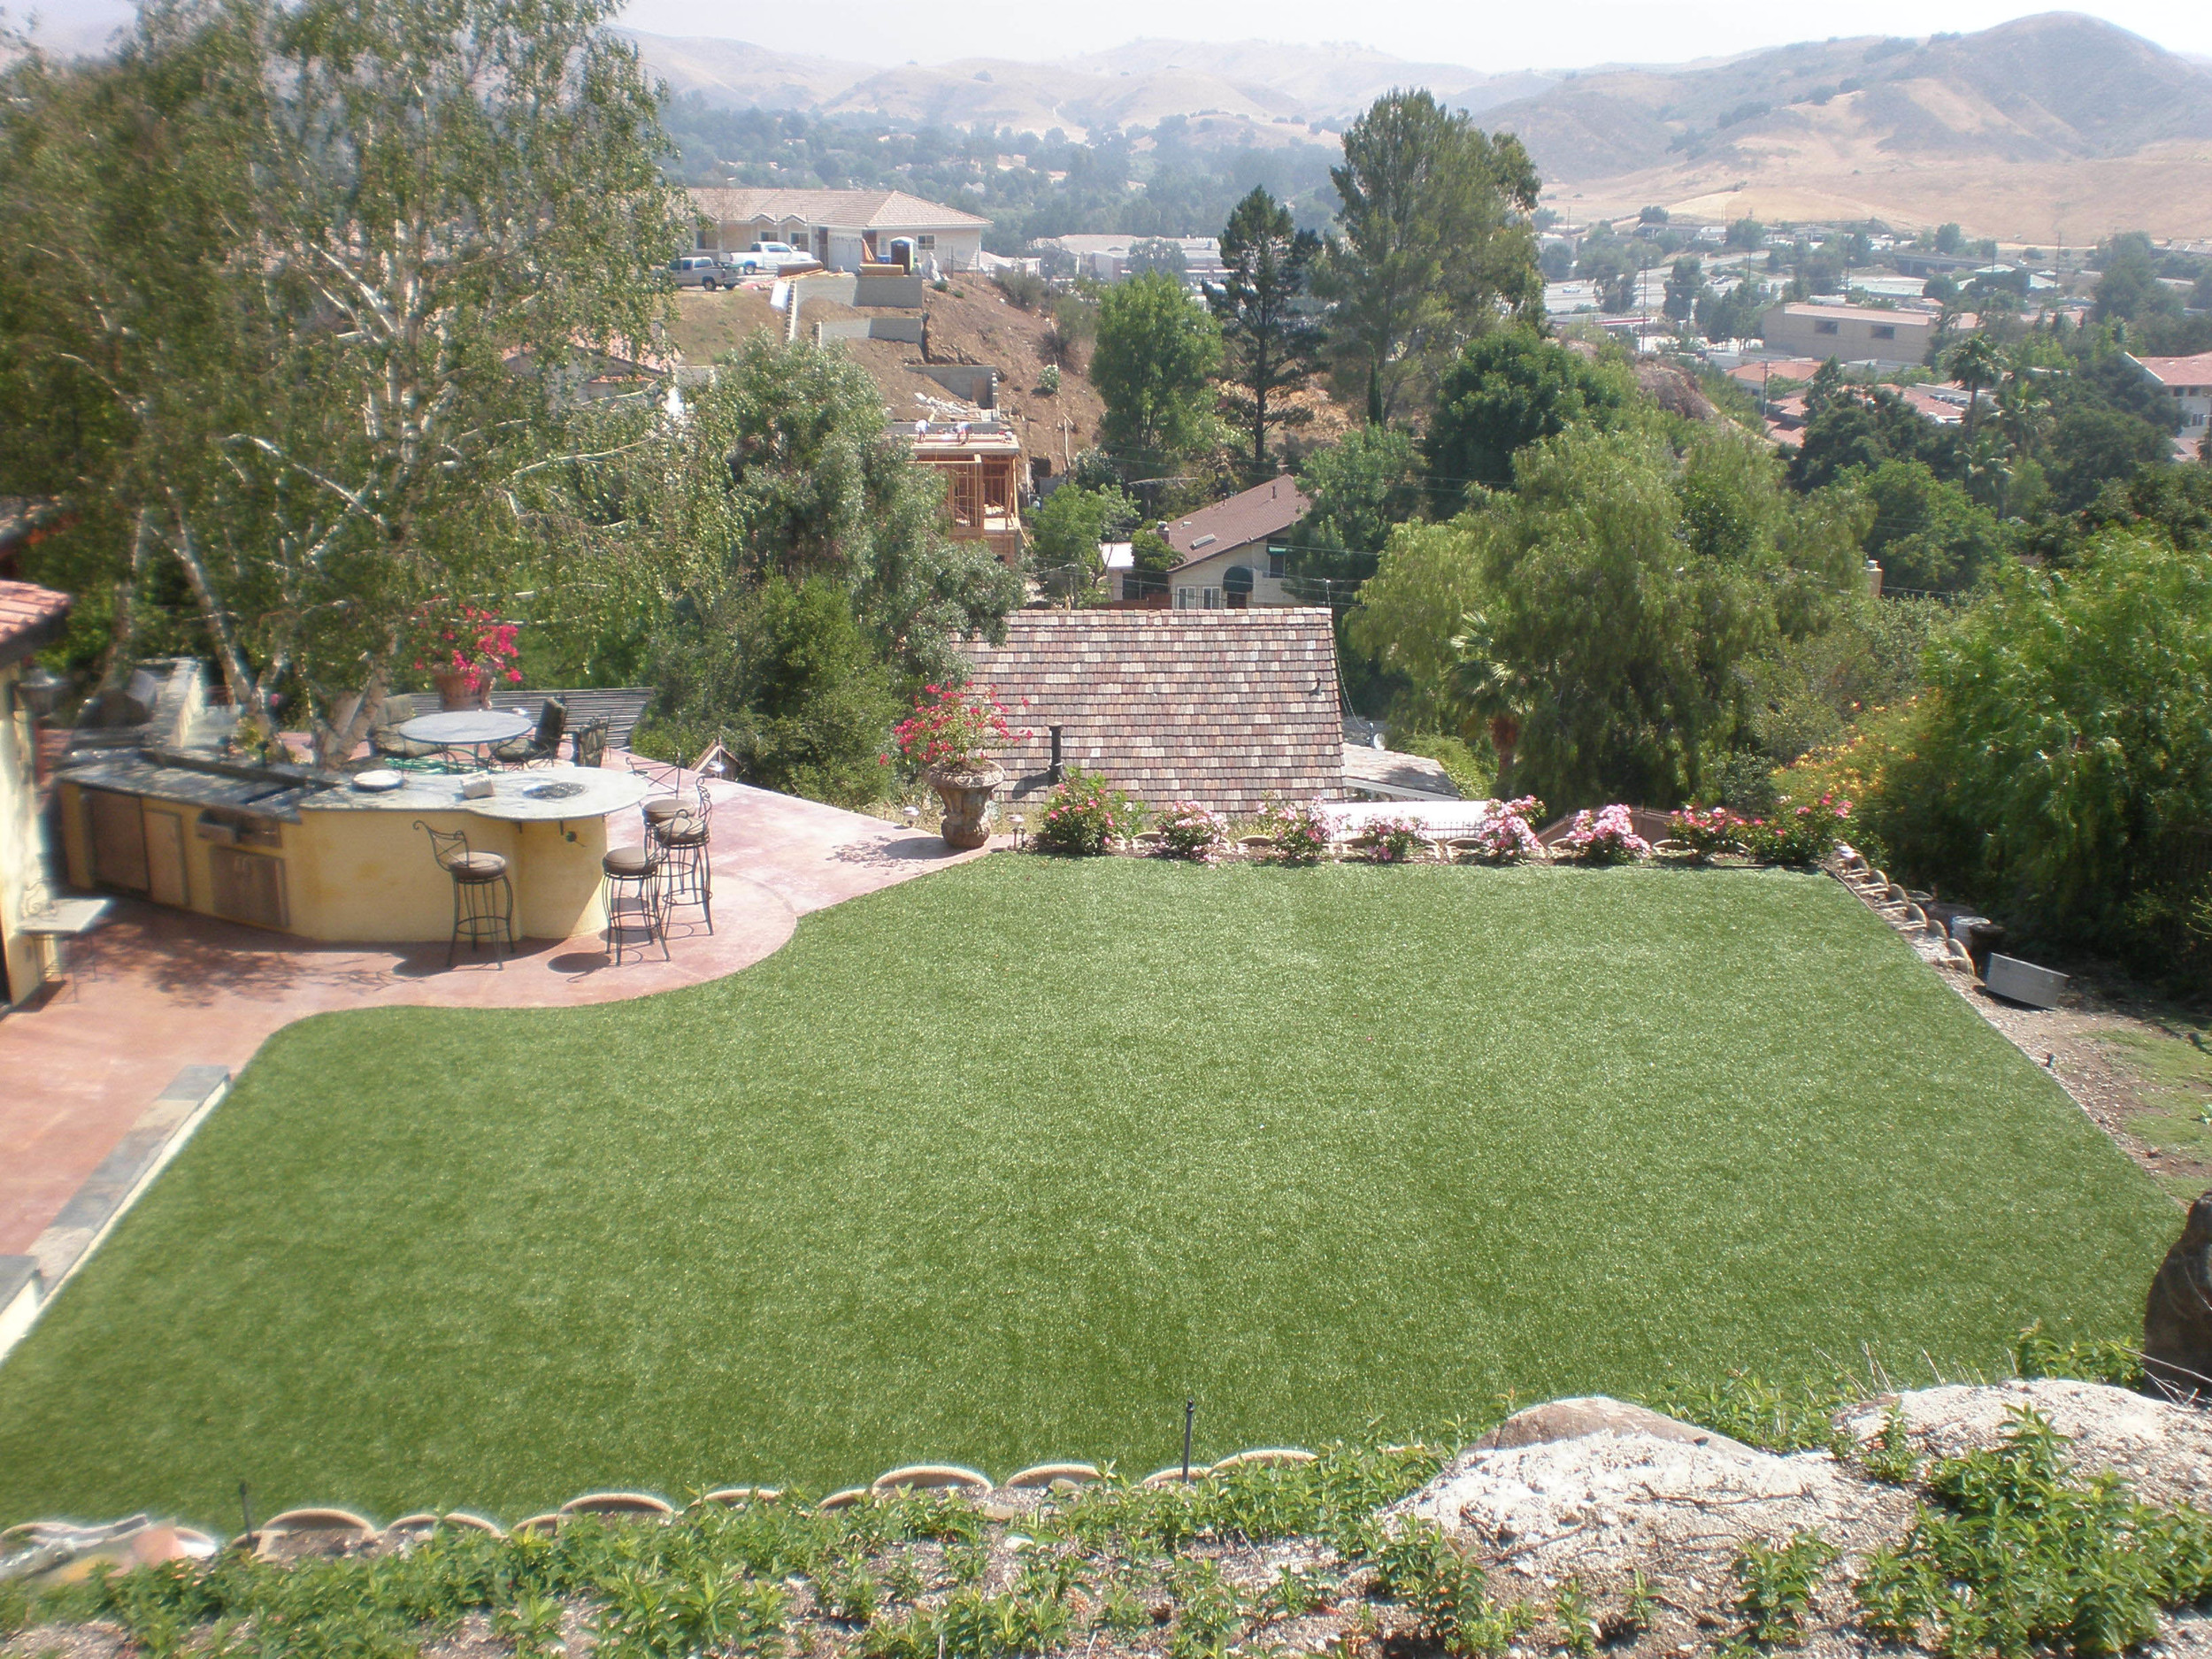 Synthetic grass landscape